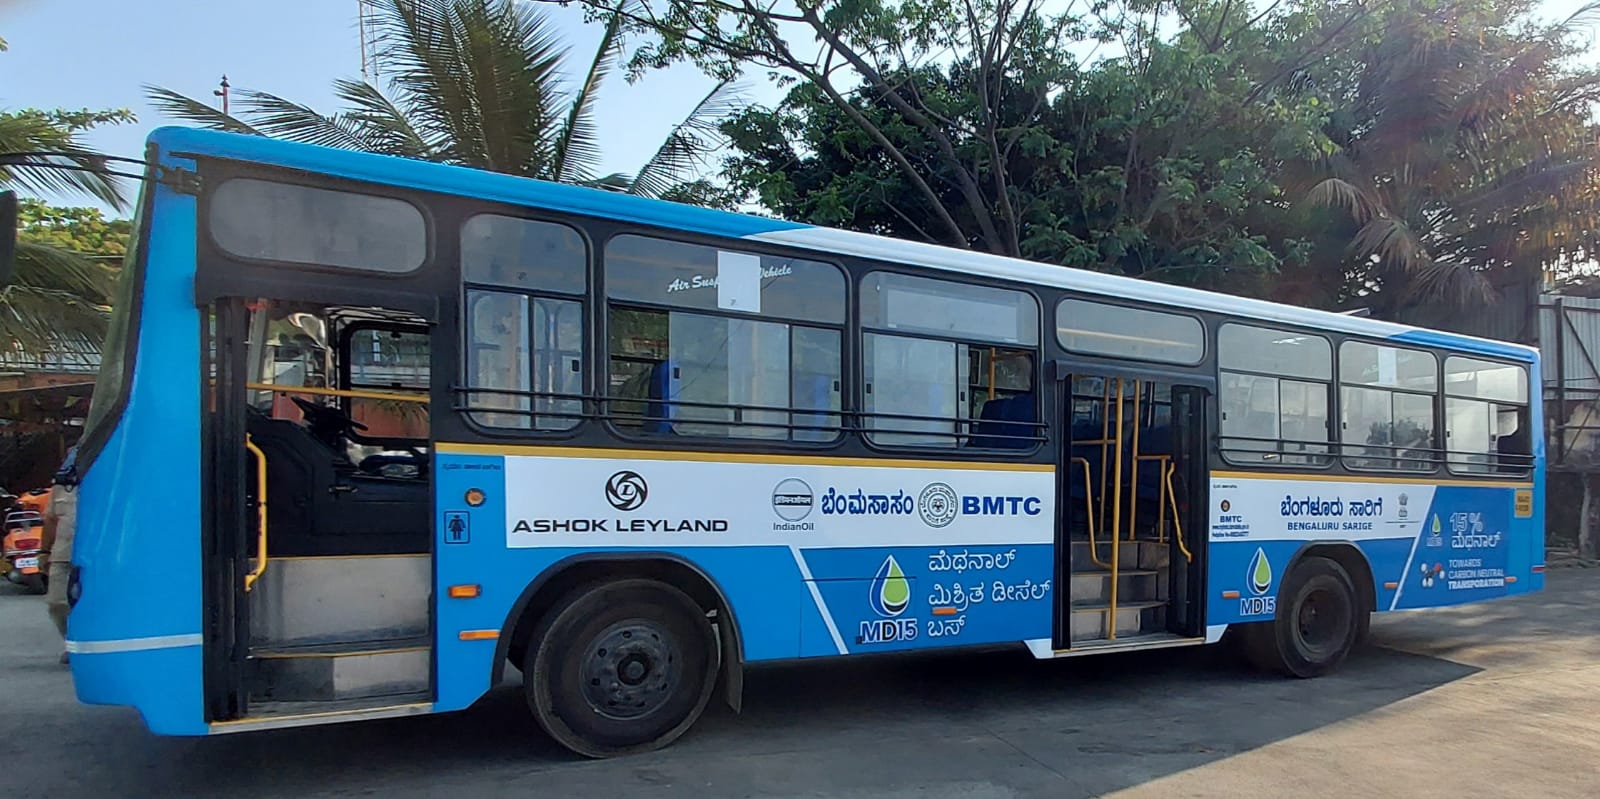 BMTC to run buses using 15% methanol-blended fuel on a pilot basis for the next 3 months